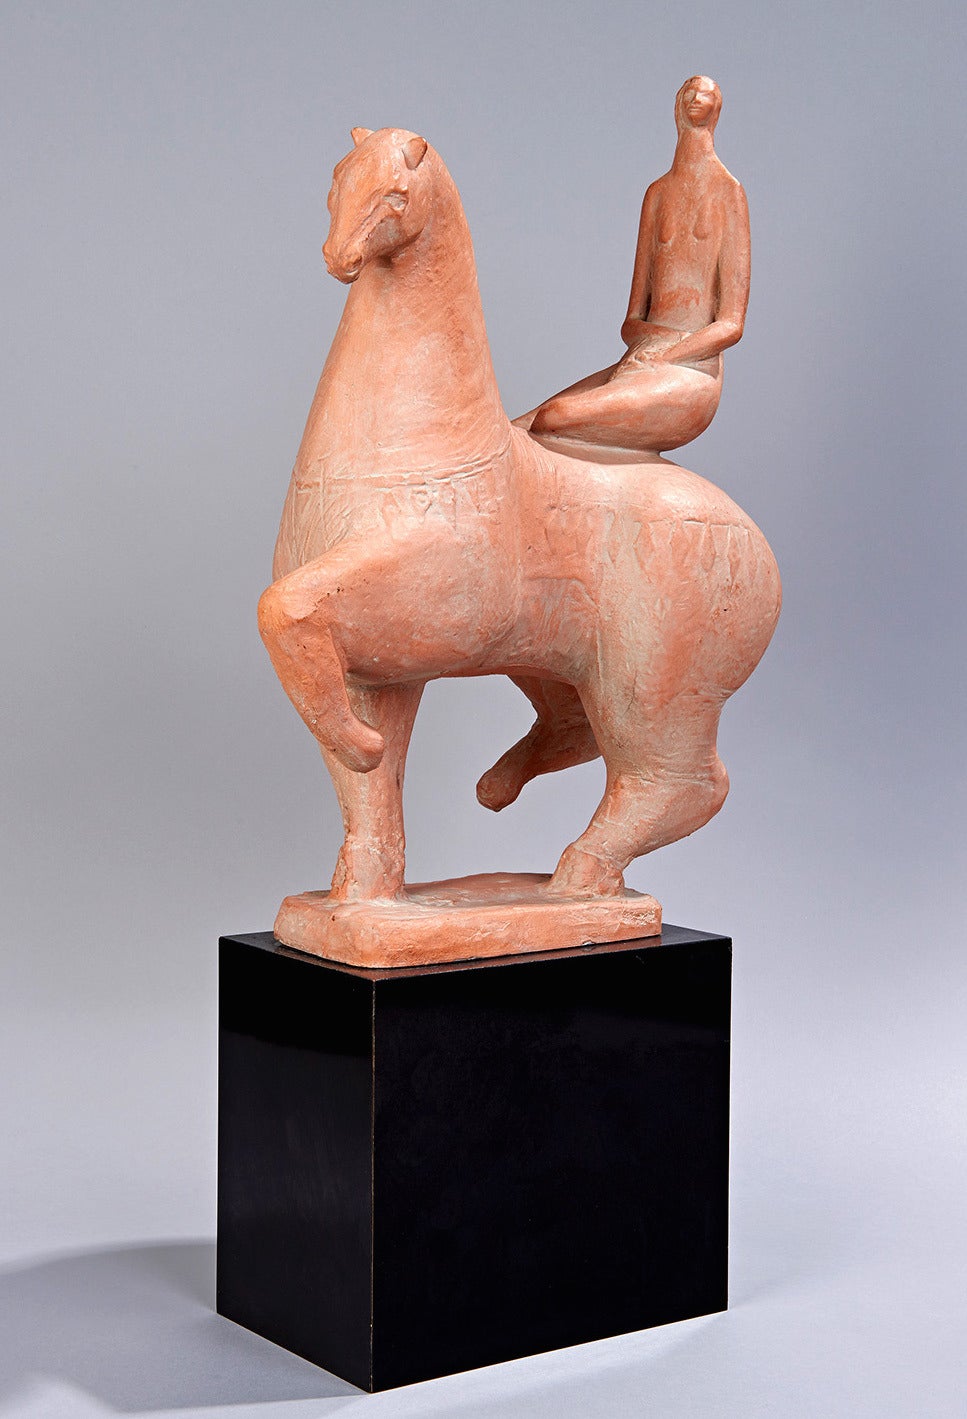 This anonymous sculpture made in the 1960s is a magnificent equestrian monument in miniature. Both the rider and the horse have superbly expressive lines and proportions. The contrast between the relaxed posture and attenuated femininity of the